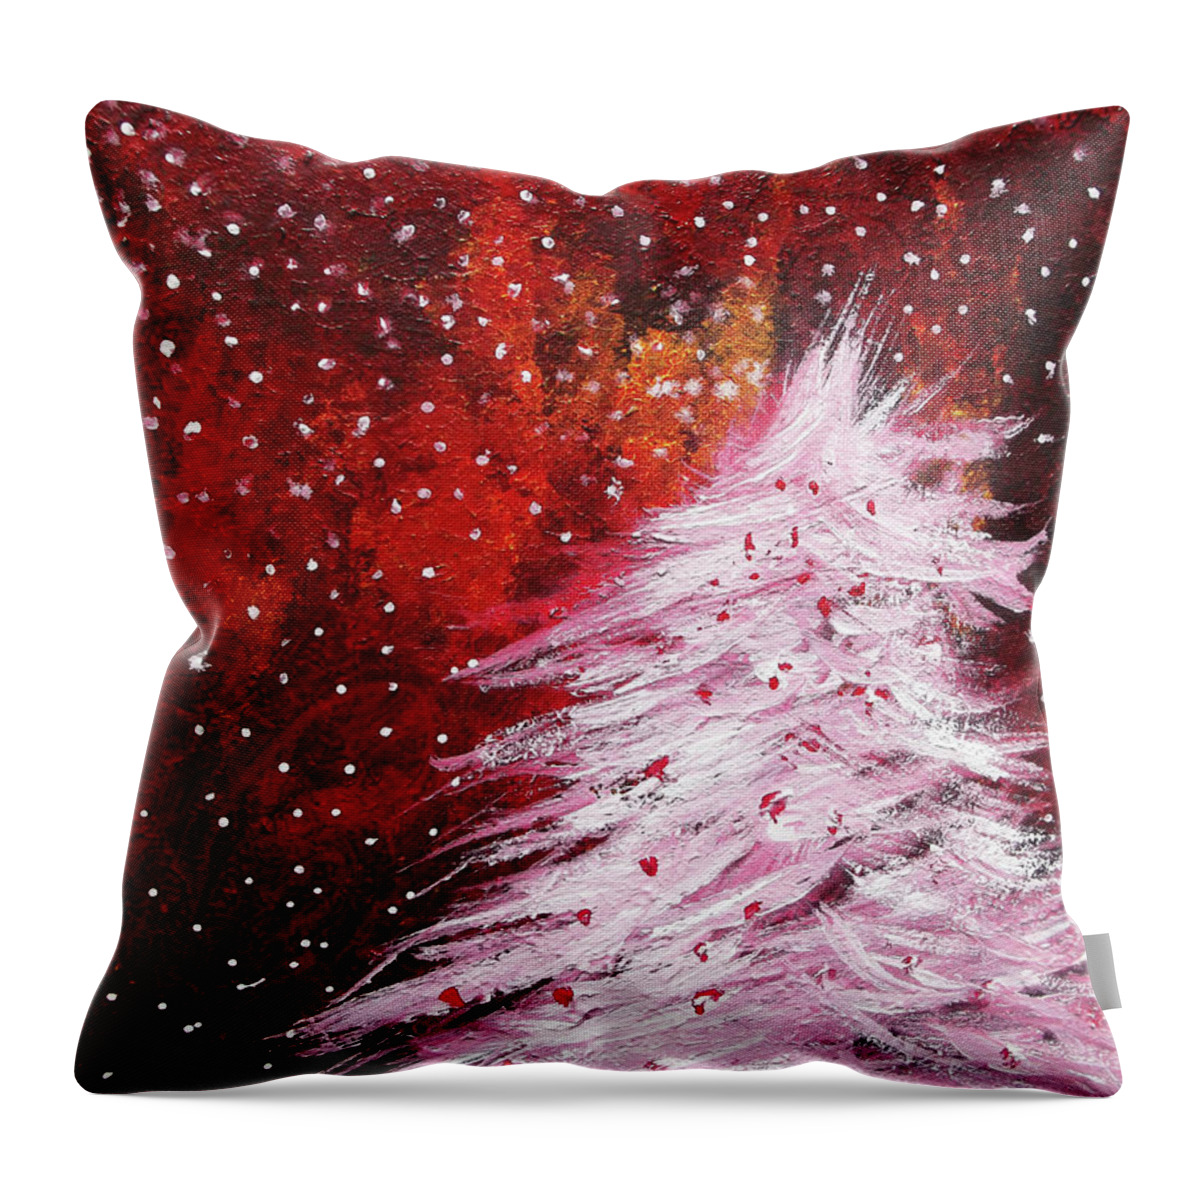 Winter Throw Pillow featuring the painting White Christmas Tree by Melinda Firestone-White